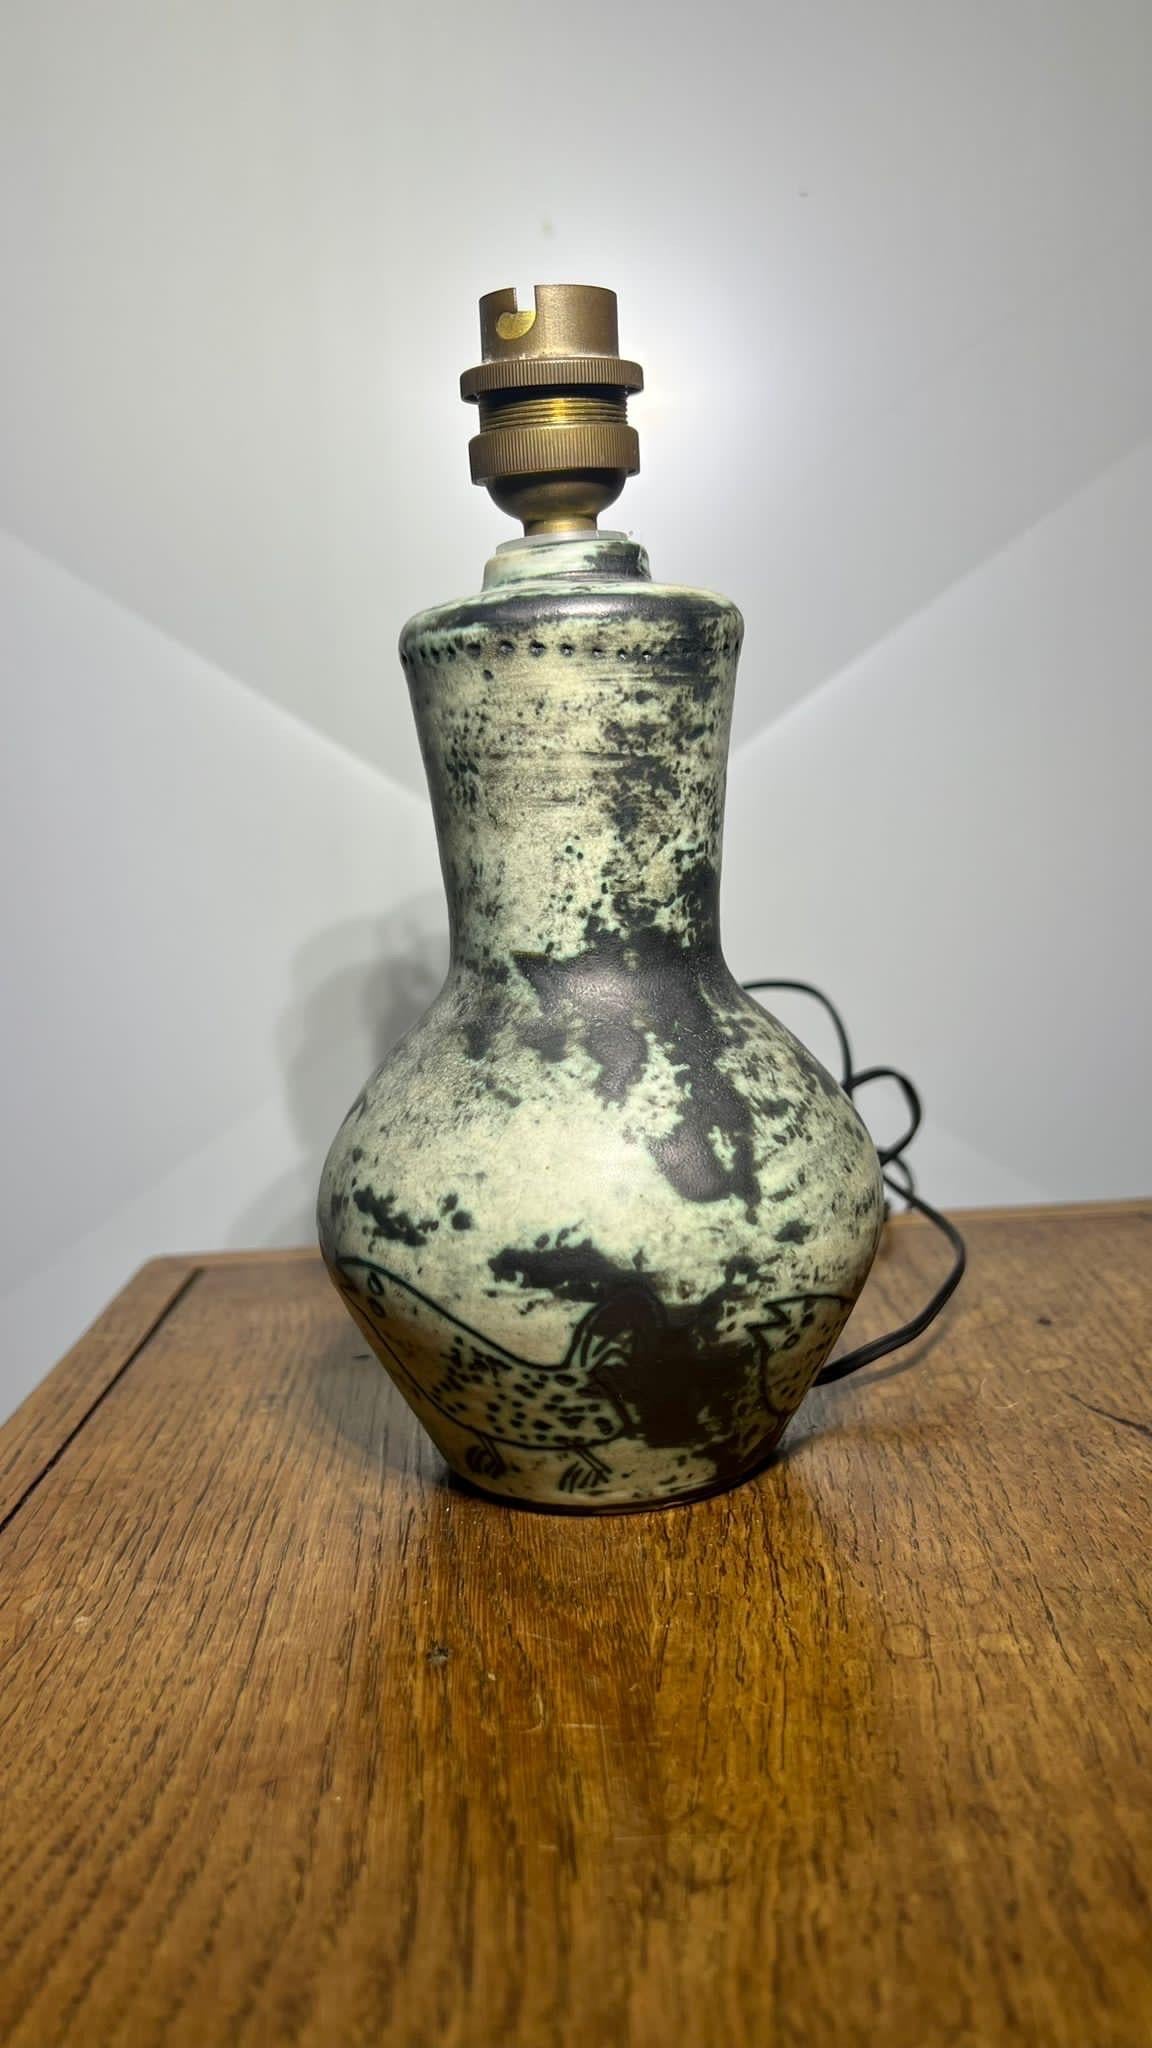 A typical table lamp signed J. Blin.